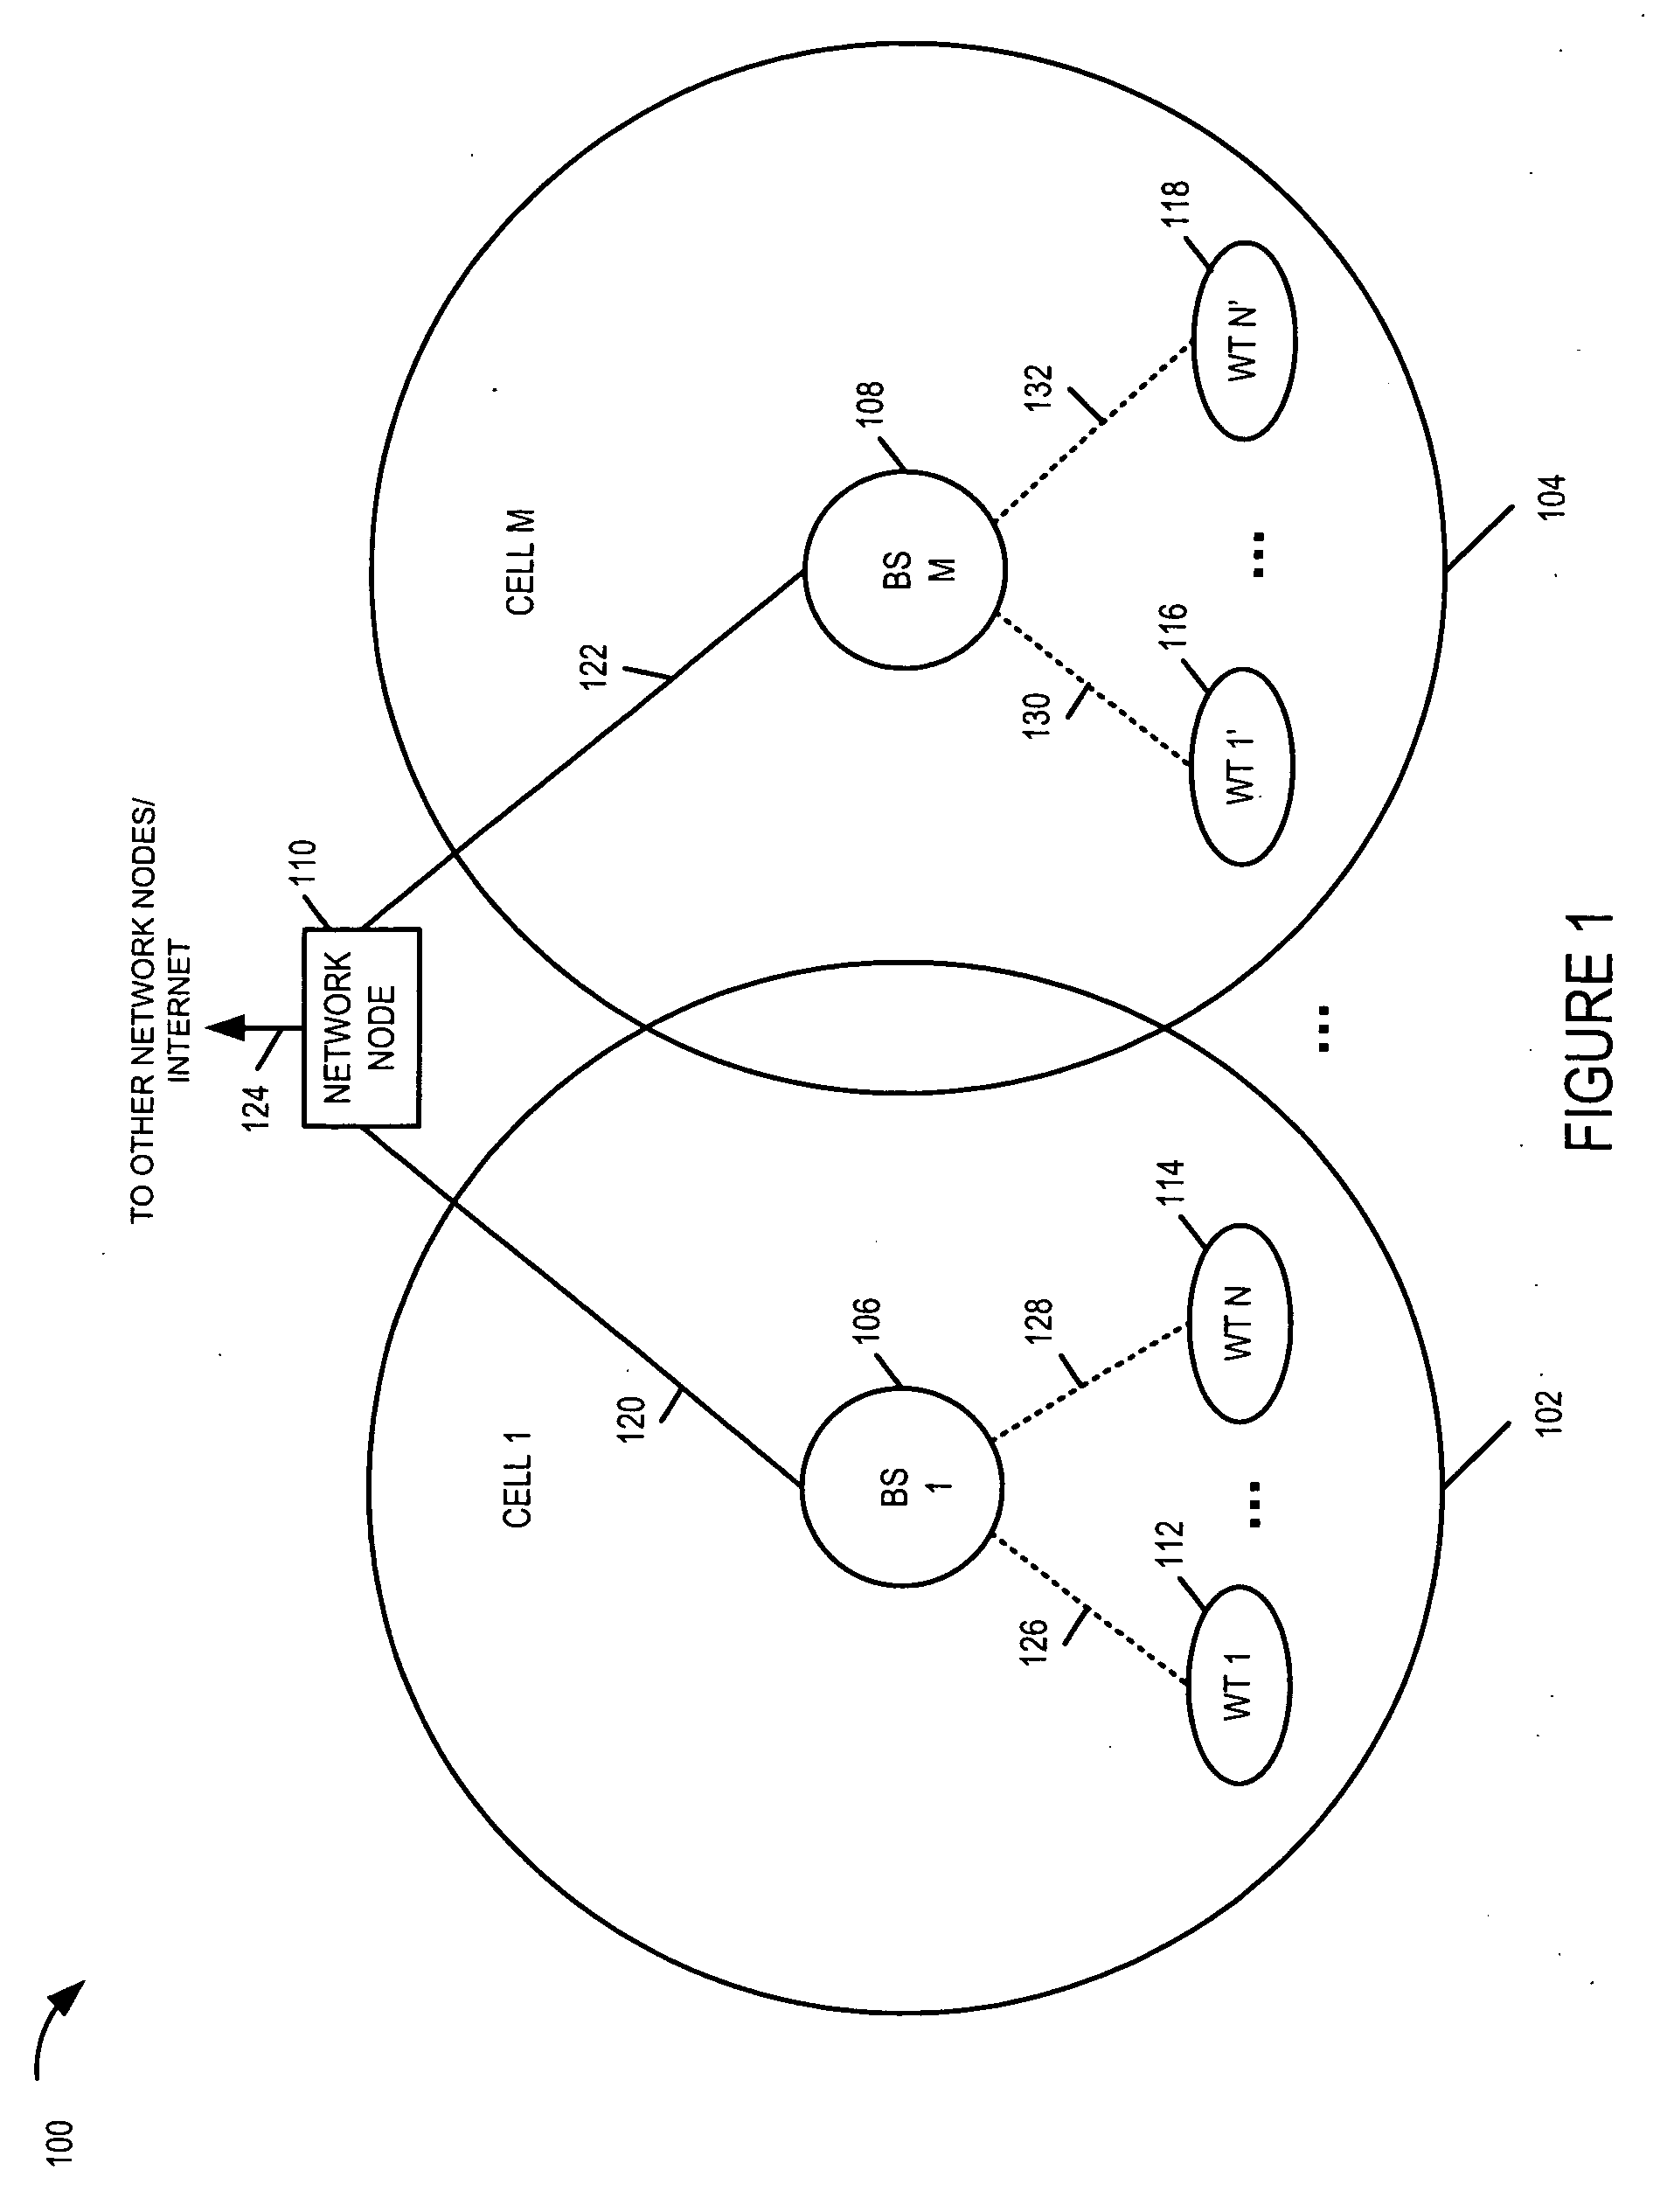 Methods and apparatus for use in a wireless communications system that uses a multi-mode base station